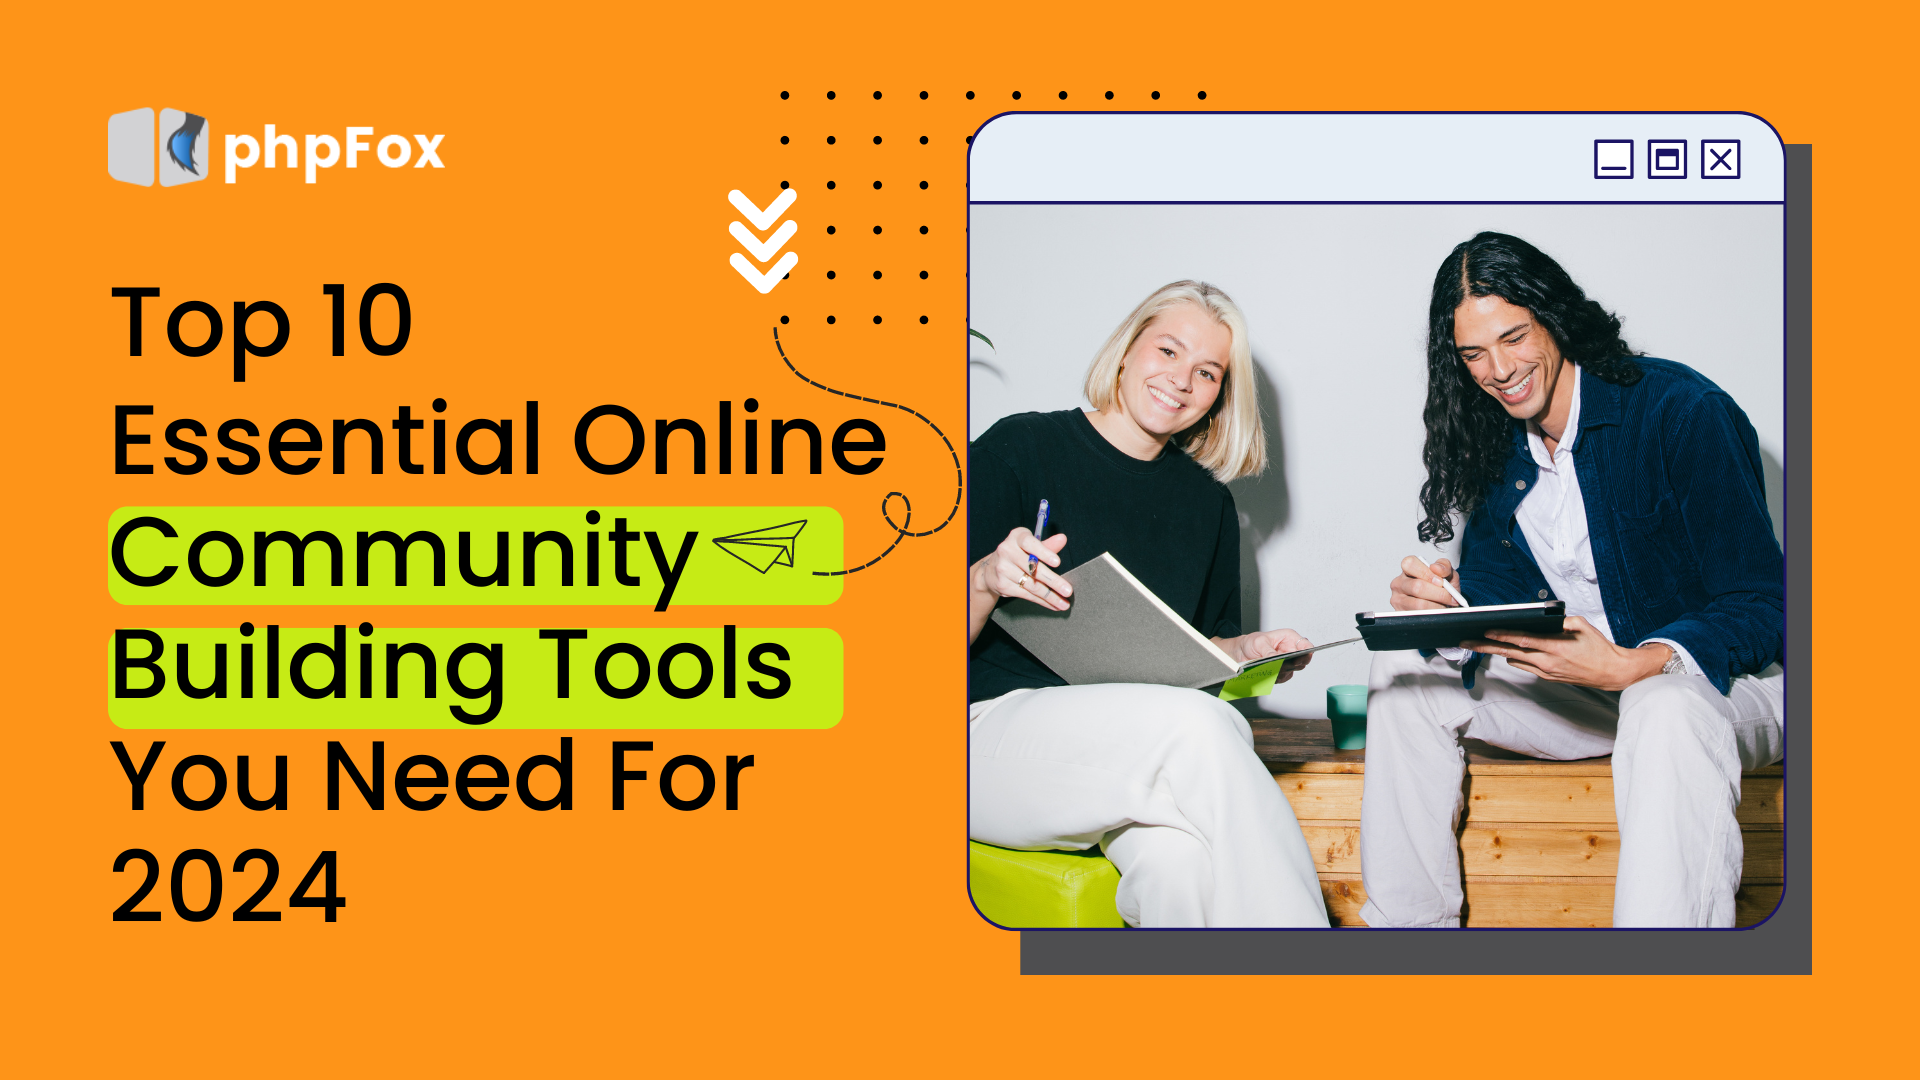 Top 10 Essential Features and Tools for Building Online Communities in 2024